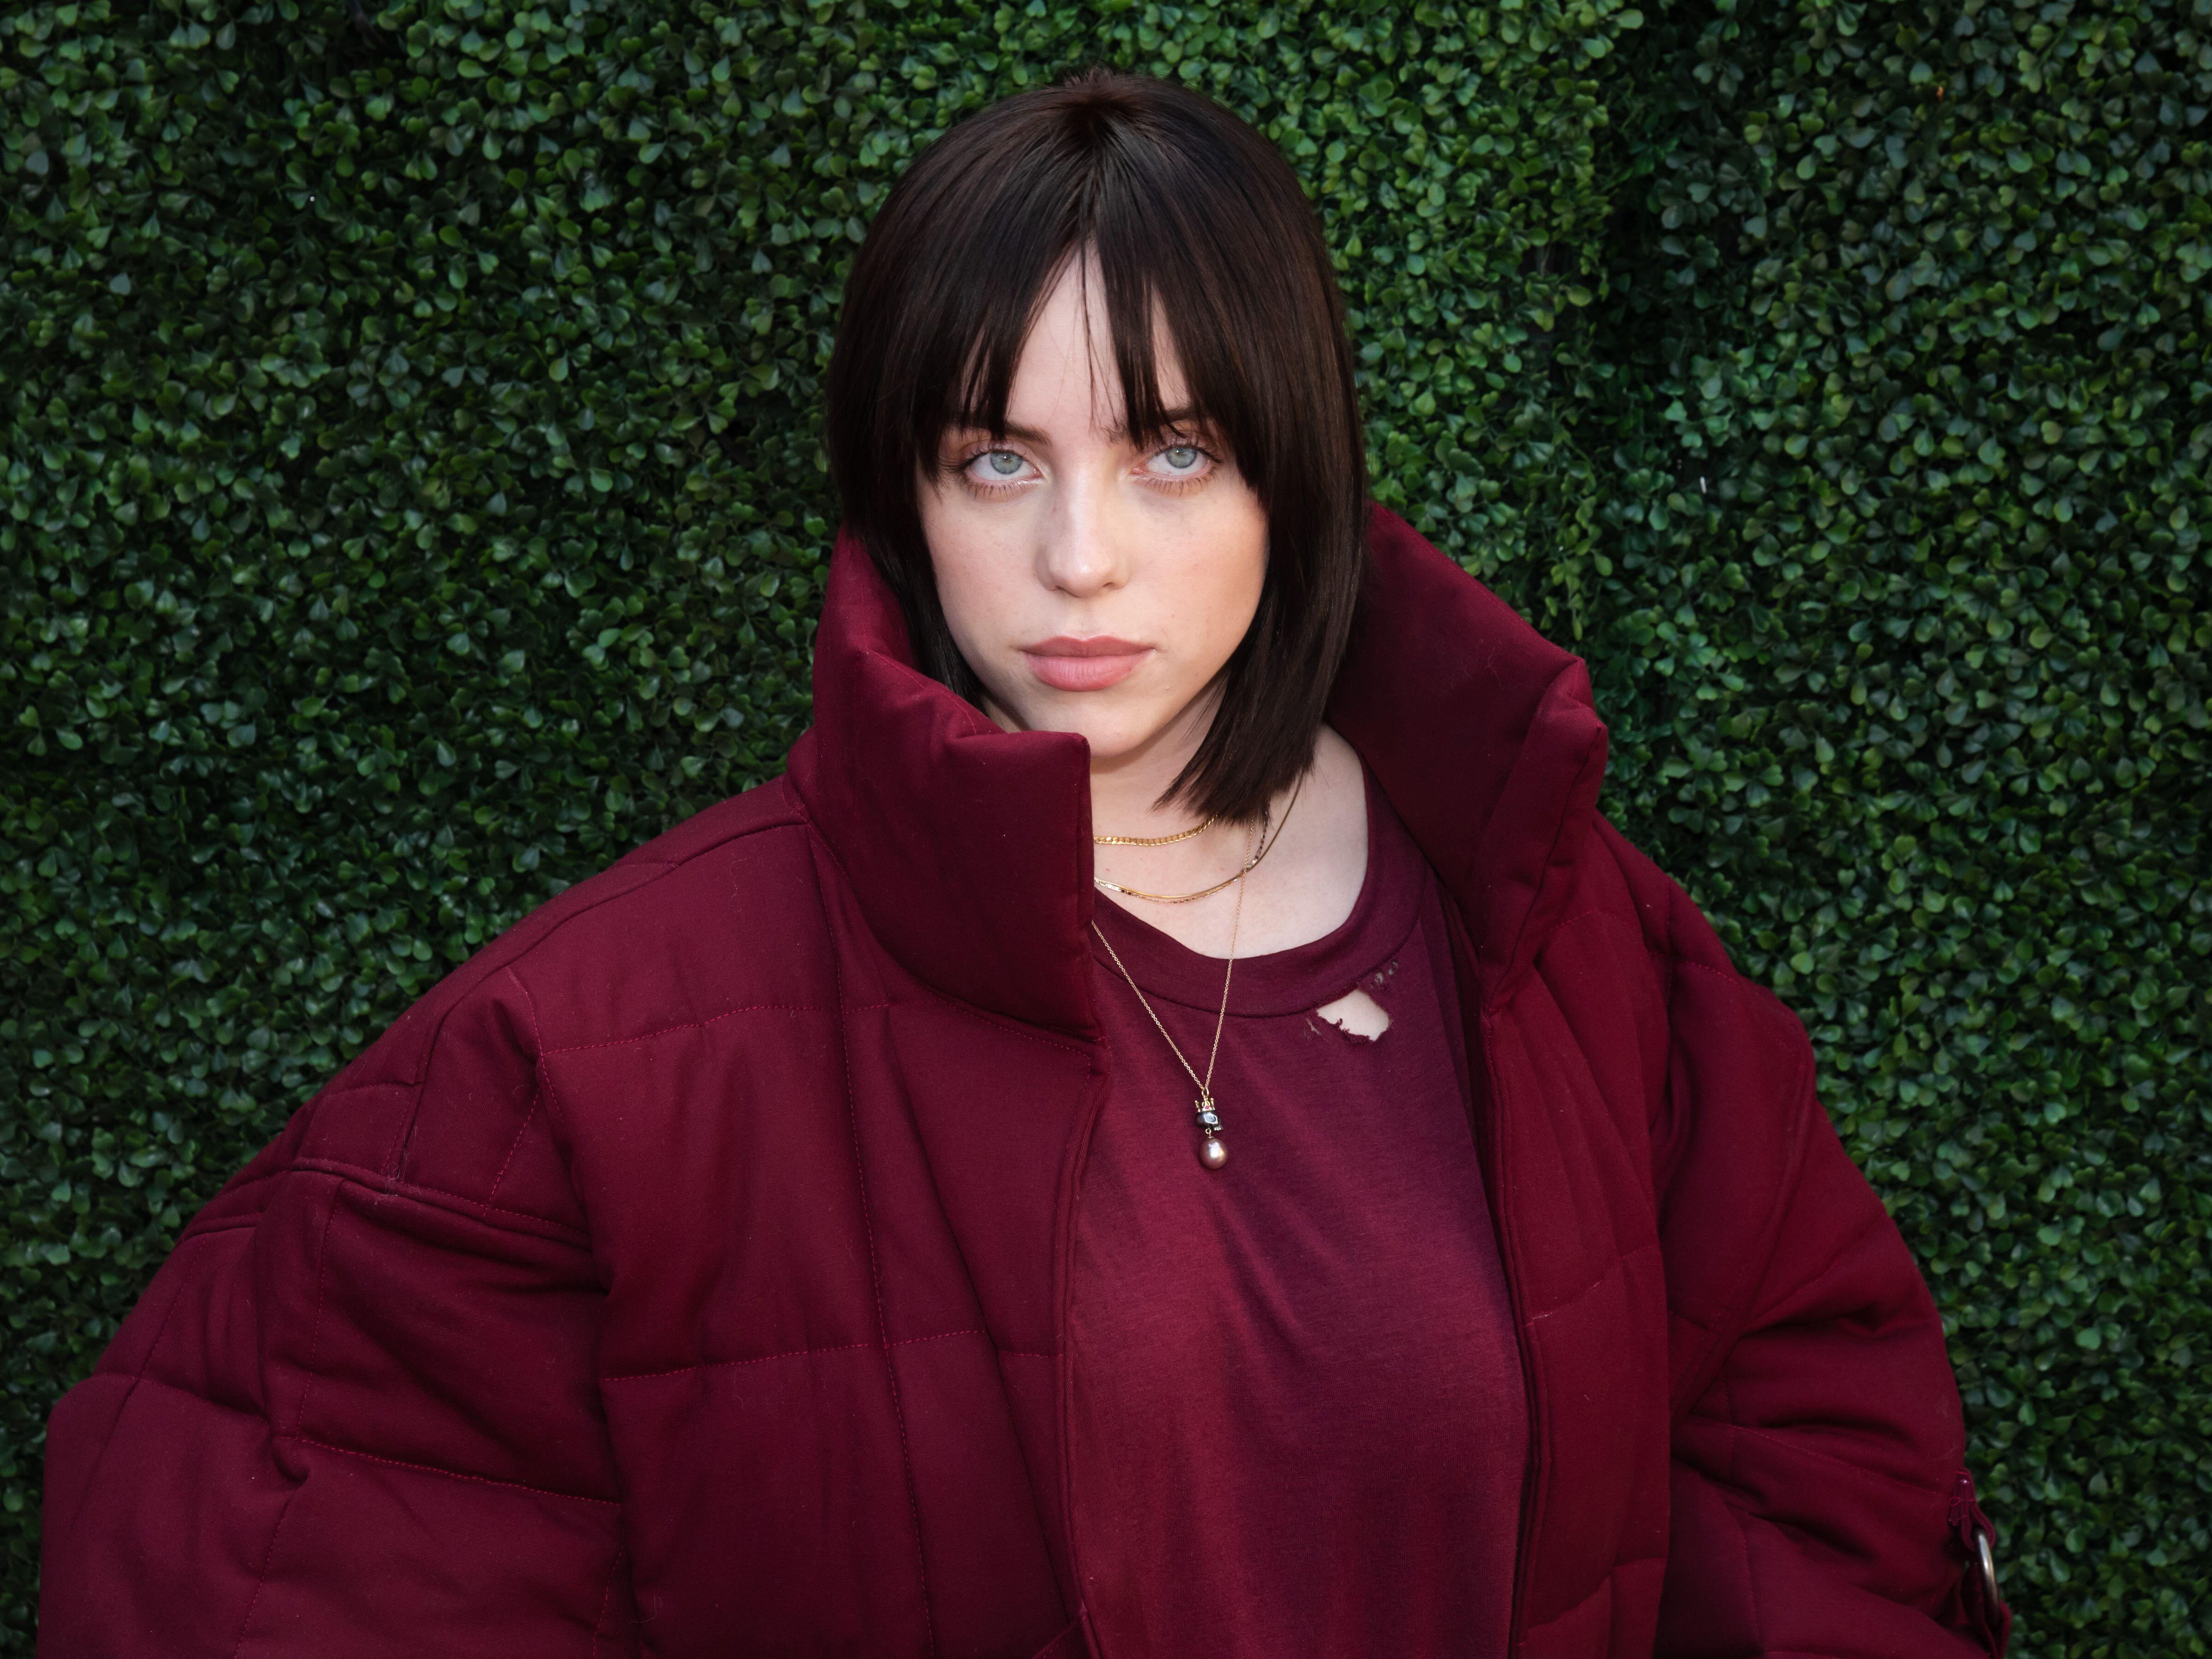 Billie Eilish: 'I tried too hard to be desirable